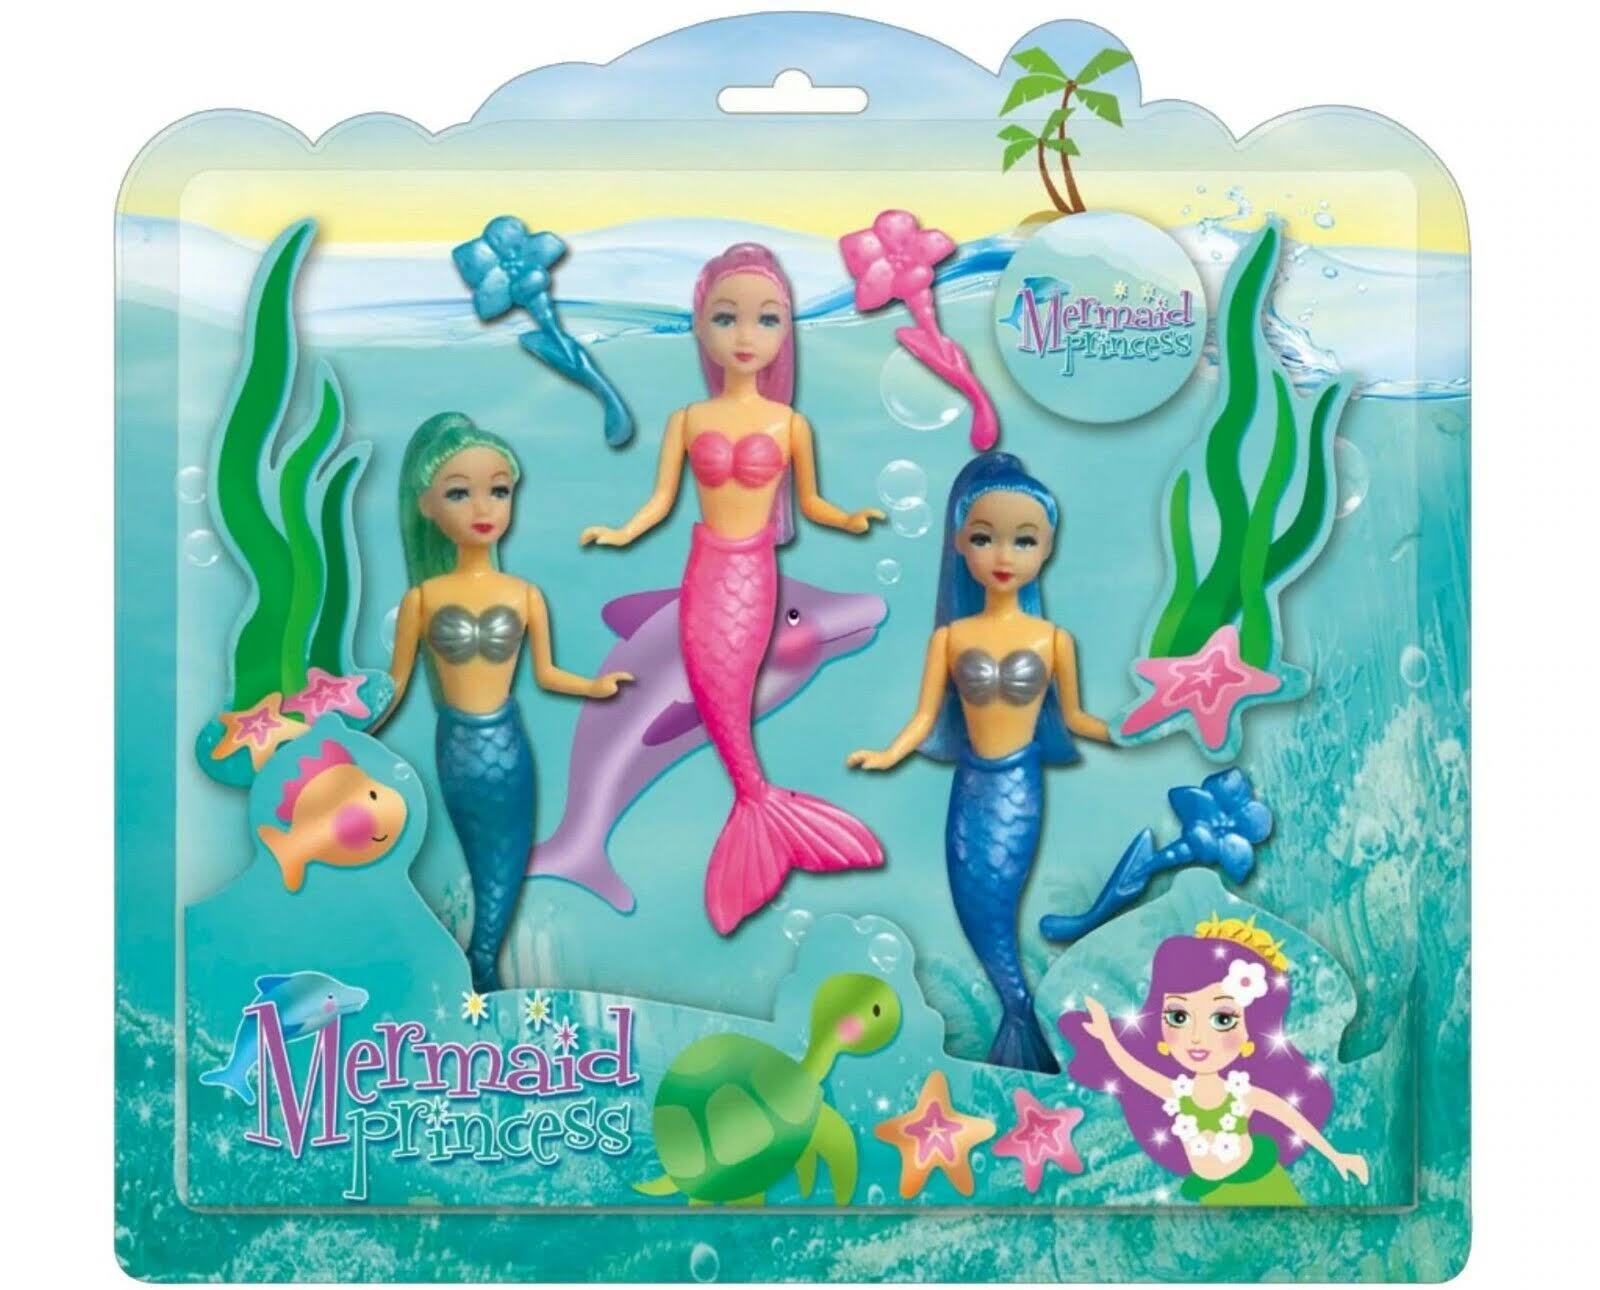 KandyToys Mermaid Princess Dolls (3 in a pack)